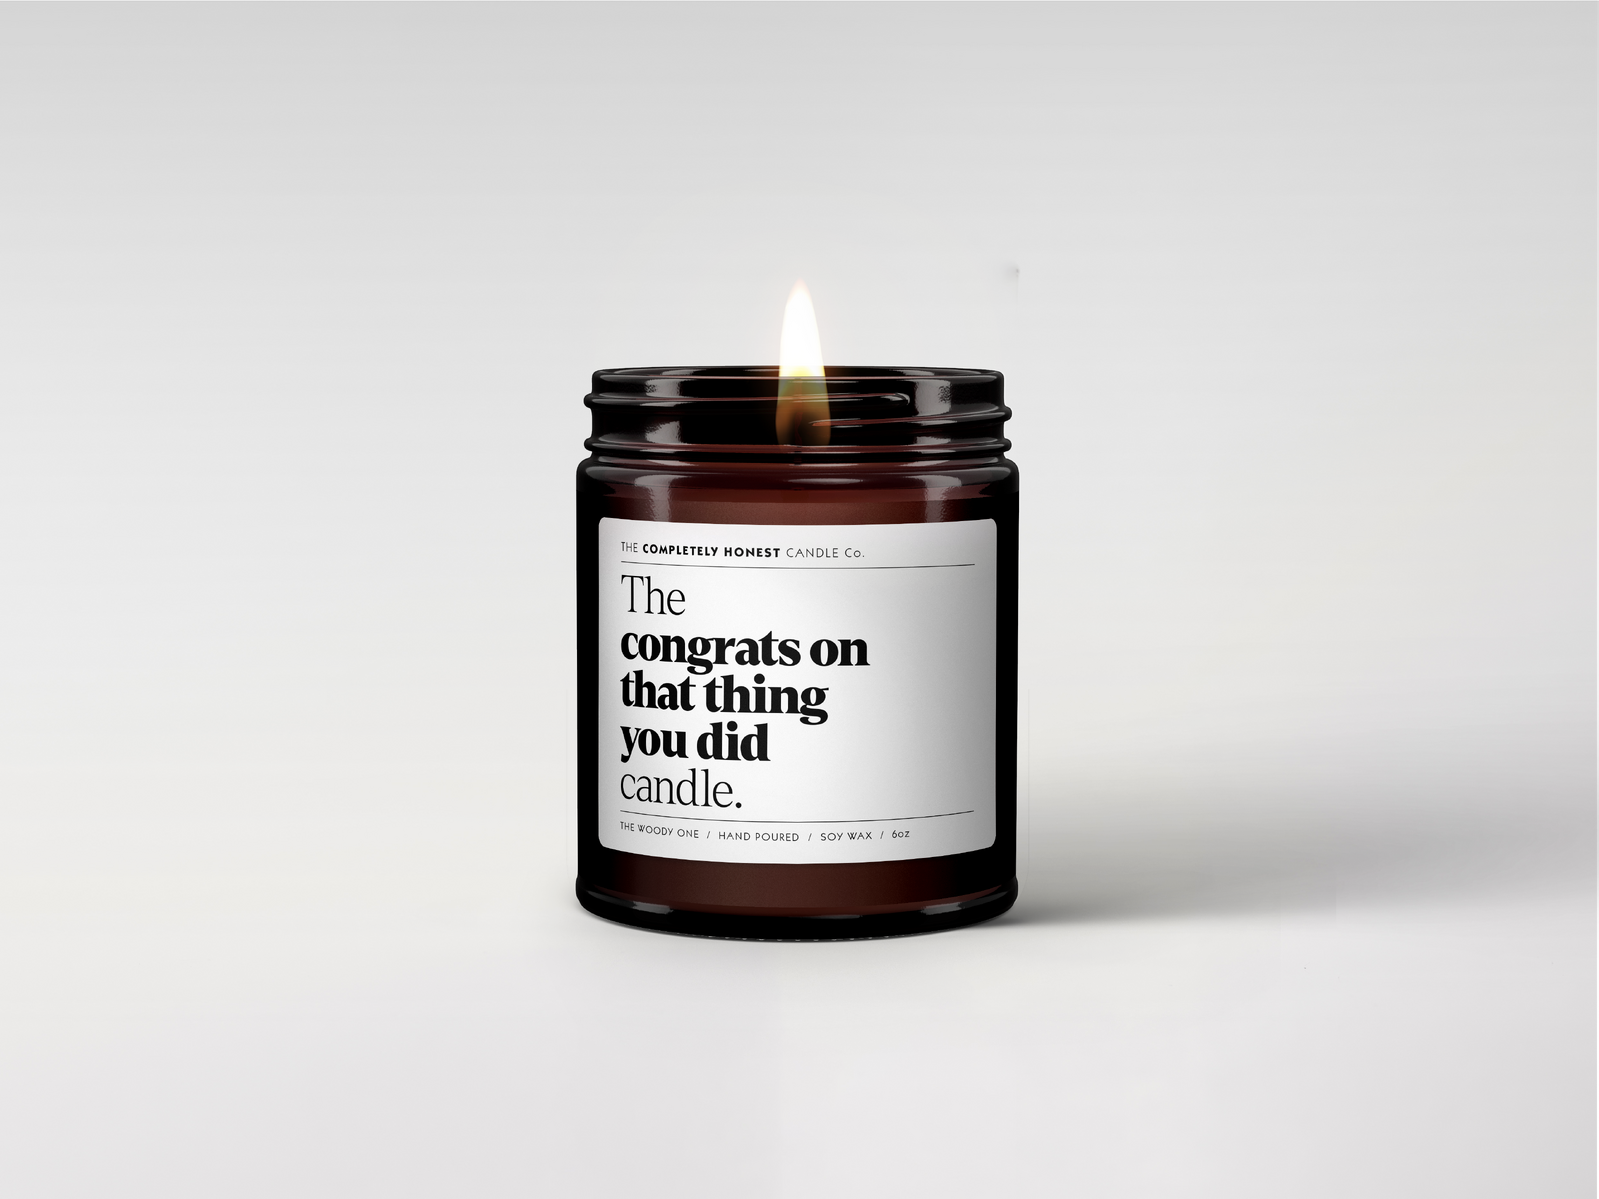 The congrats on that thing you did candle